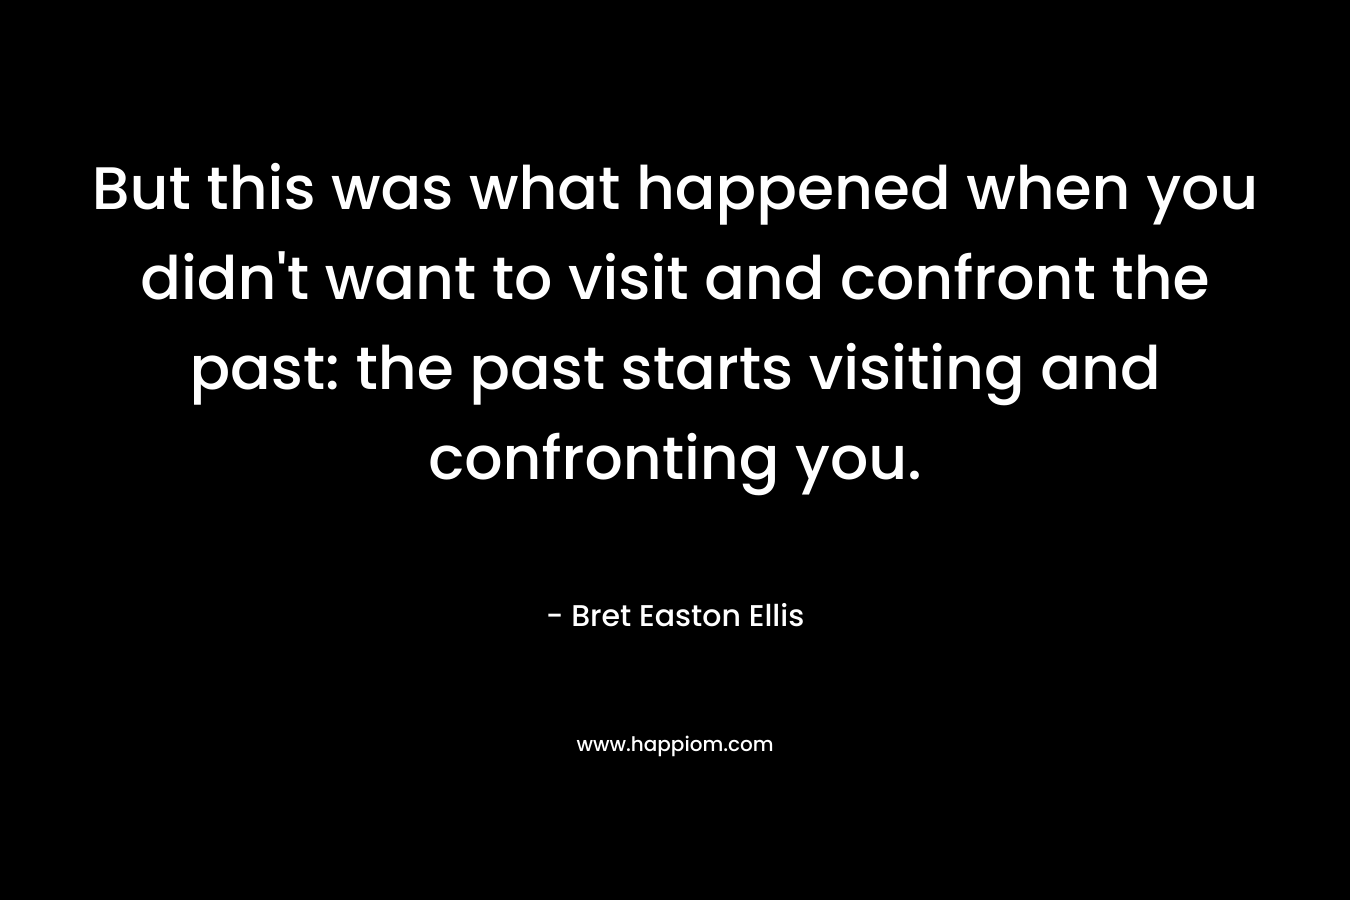 But this was what happened when you didn't want to visit and confront the past: the past starts visiting and confronting you.